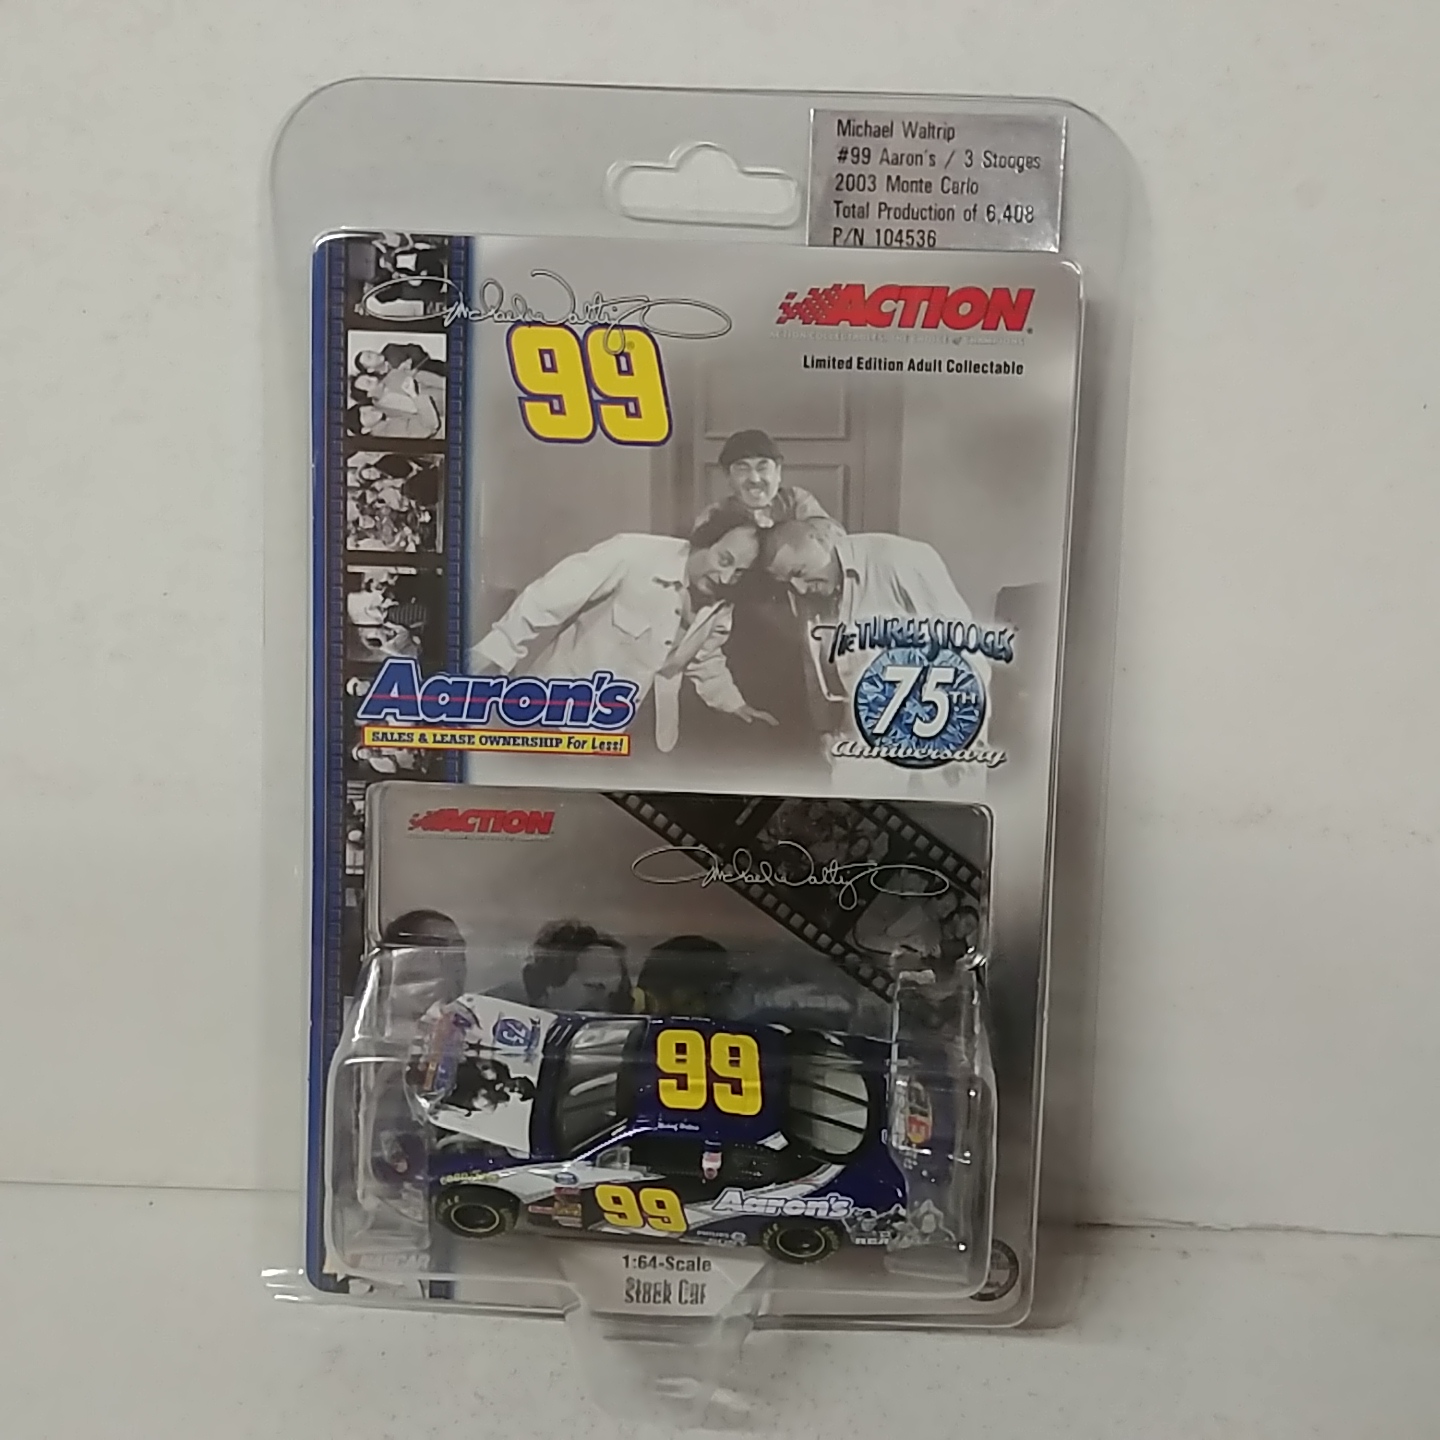 2003 Michael Waltrip 1/64th Aarons "The Three Stooges""Busch Series" ARC hood open Monte Carlo